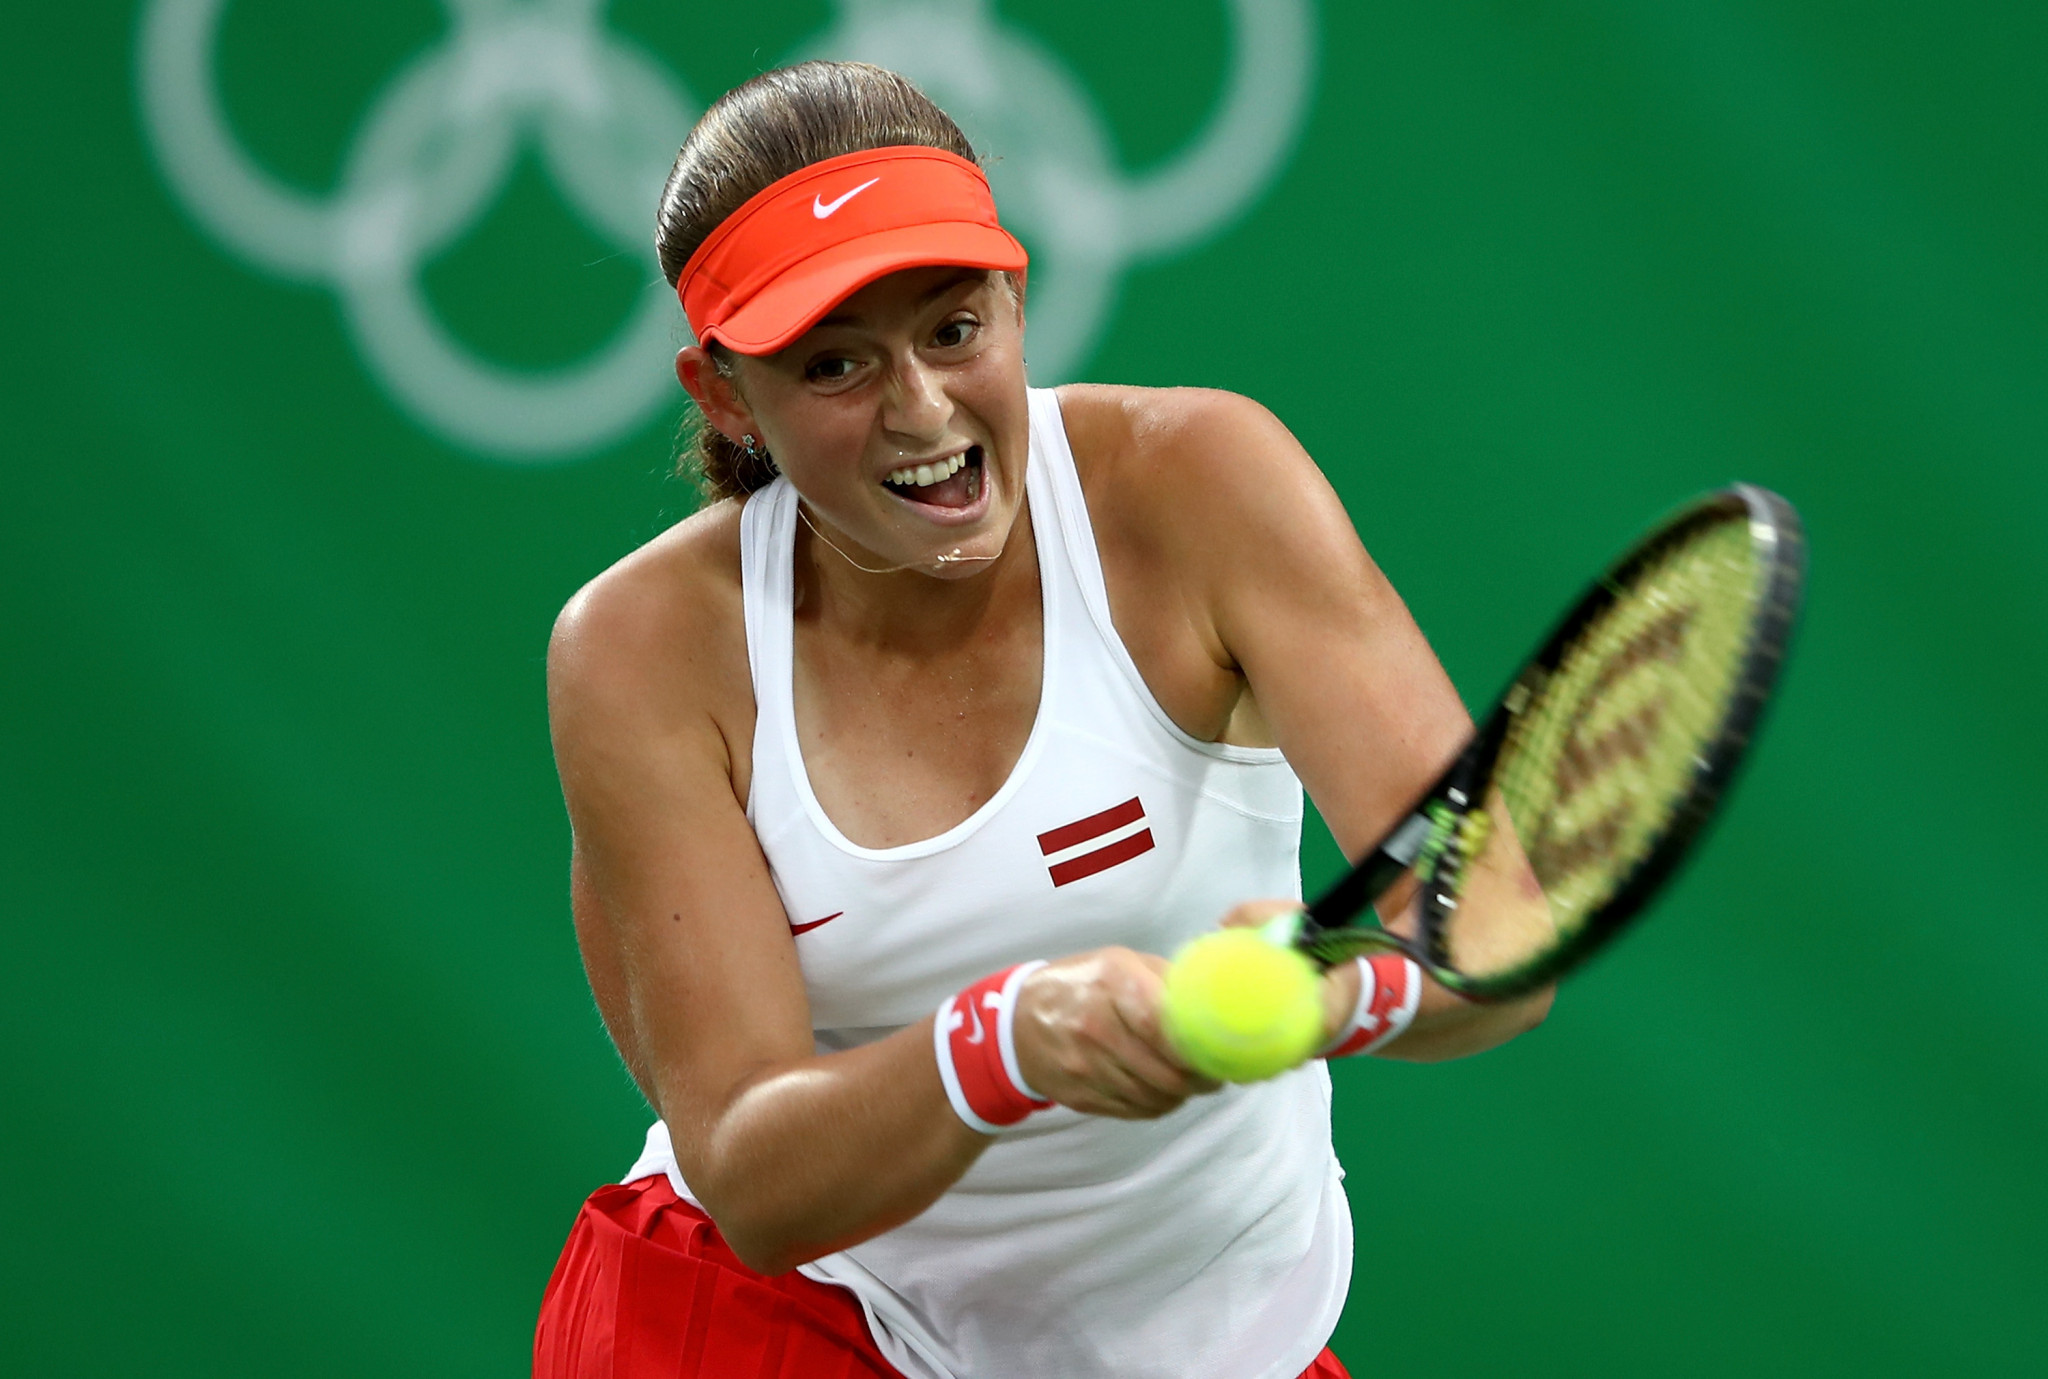 French Open winner Jeļena Ostapenko played at the Rio 2016 Olympics ©Getty Images